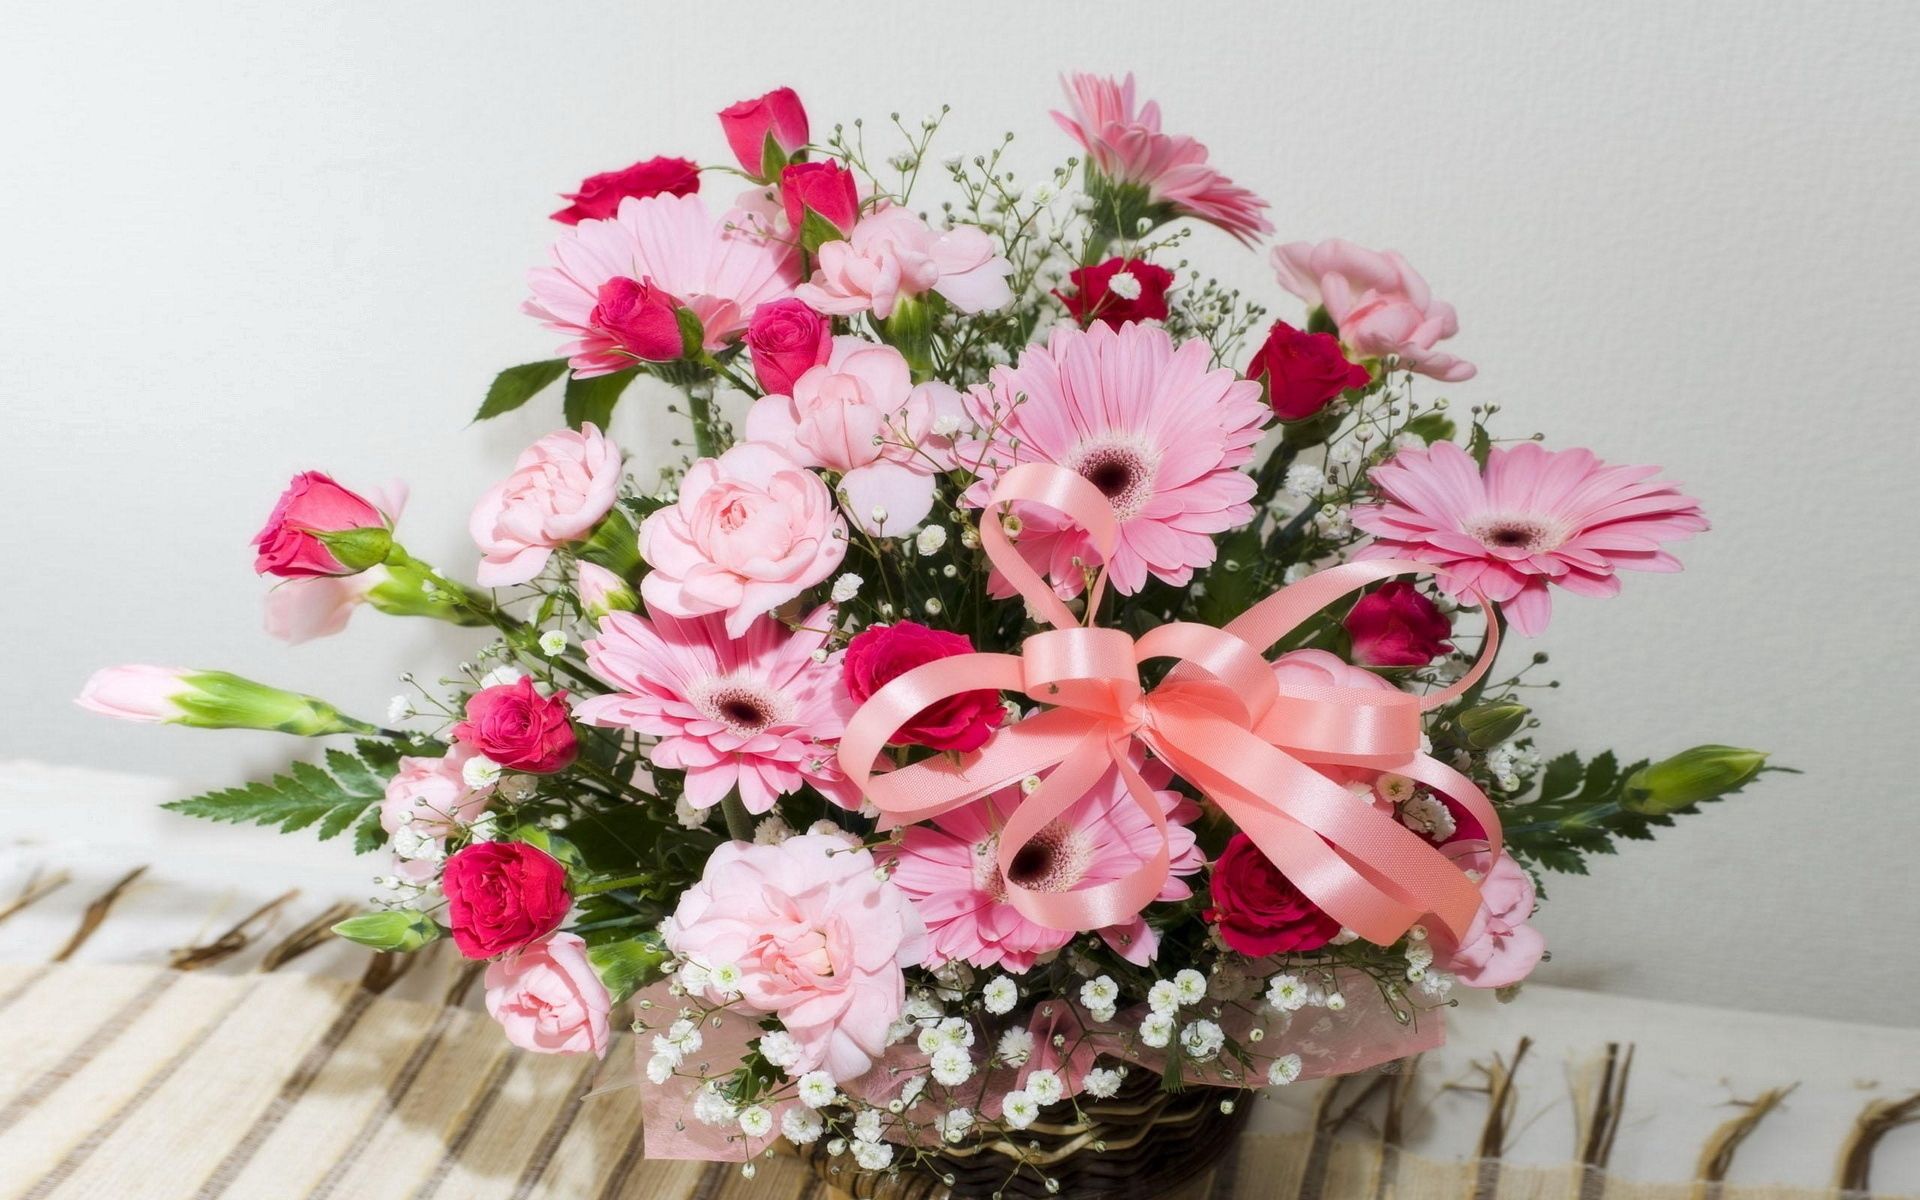 136687 download wallpaper gerberas, flowers, roses, greens, tape, basket screensavers and pictures for free